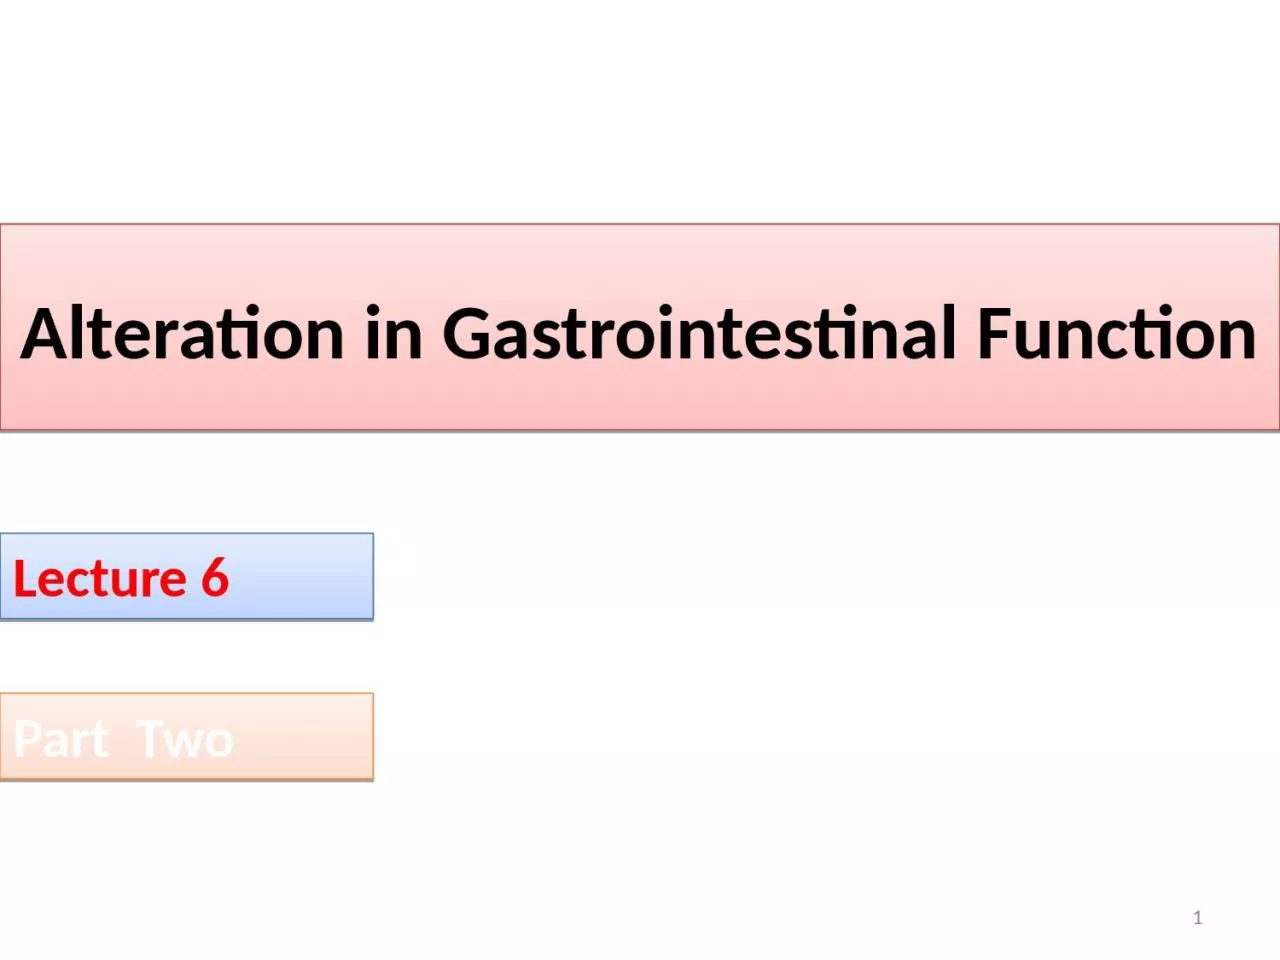 Alteration in Gastrointestinal Function